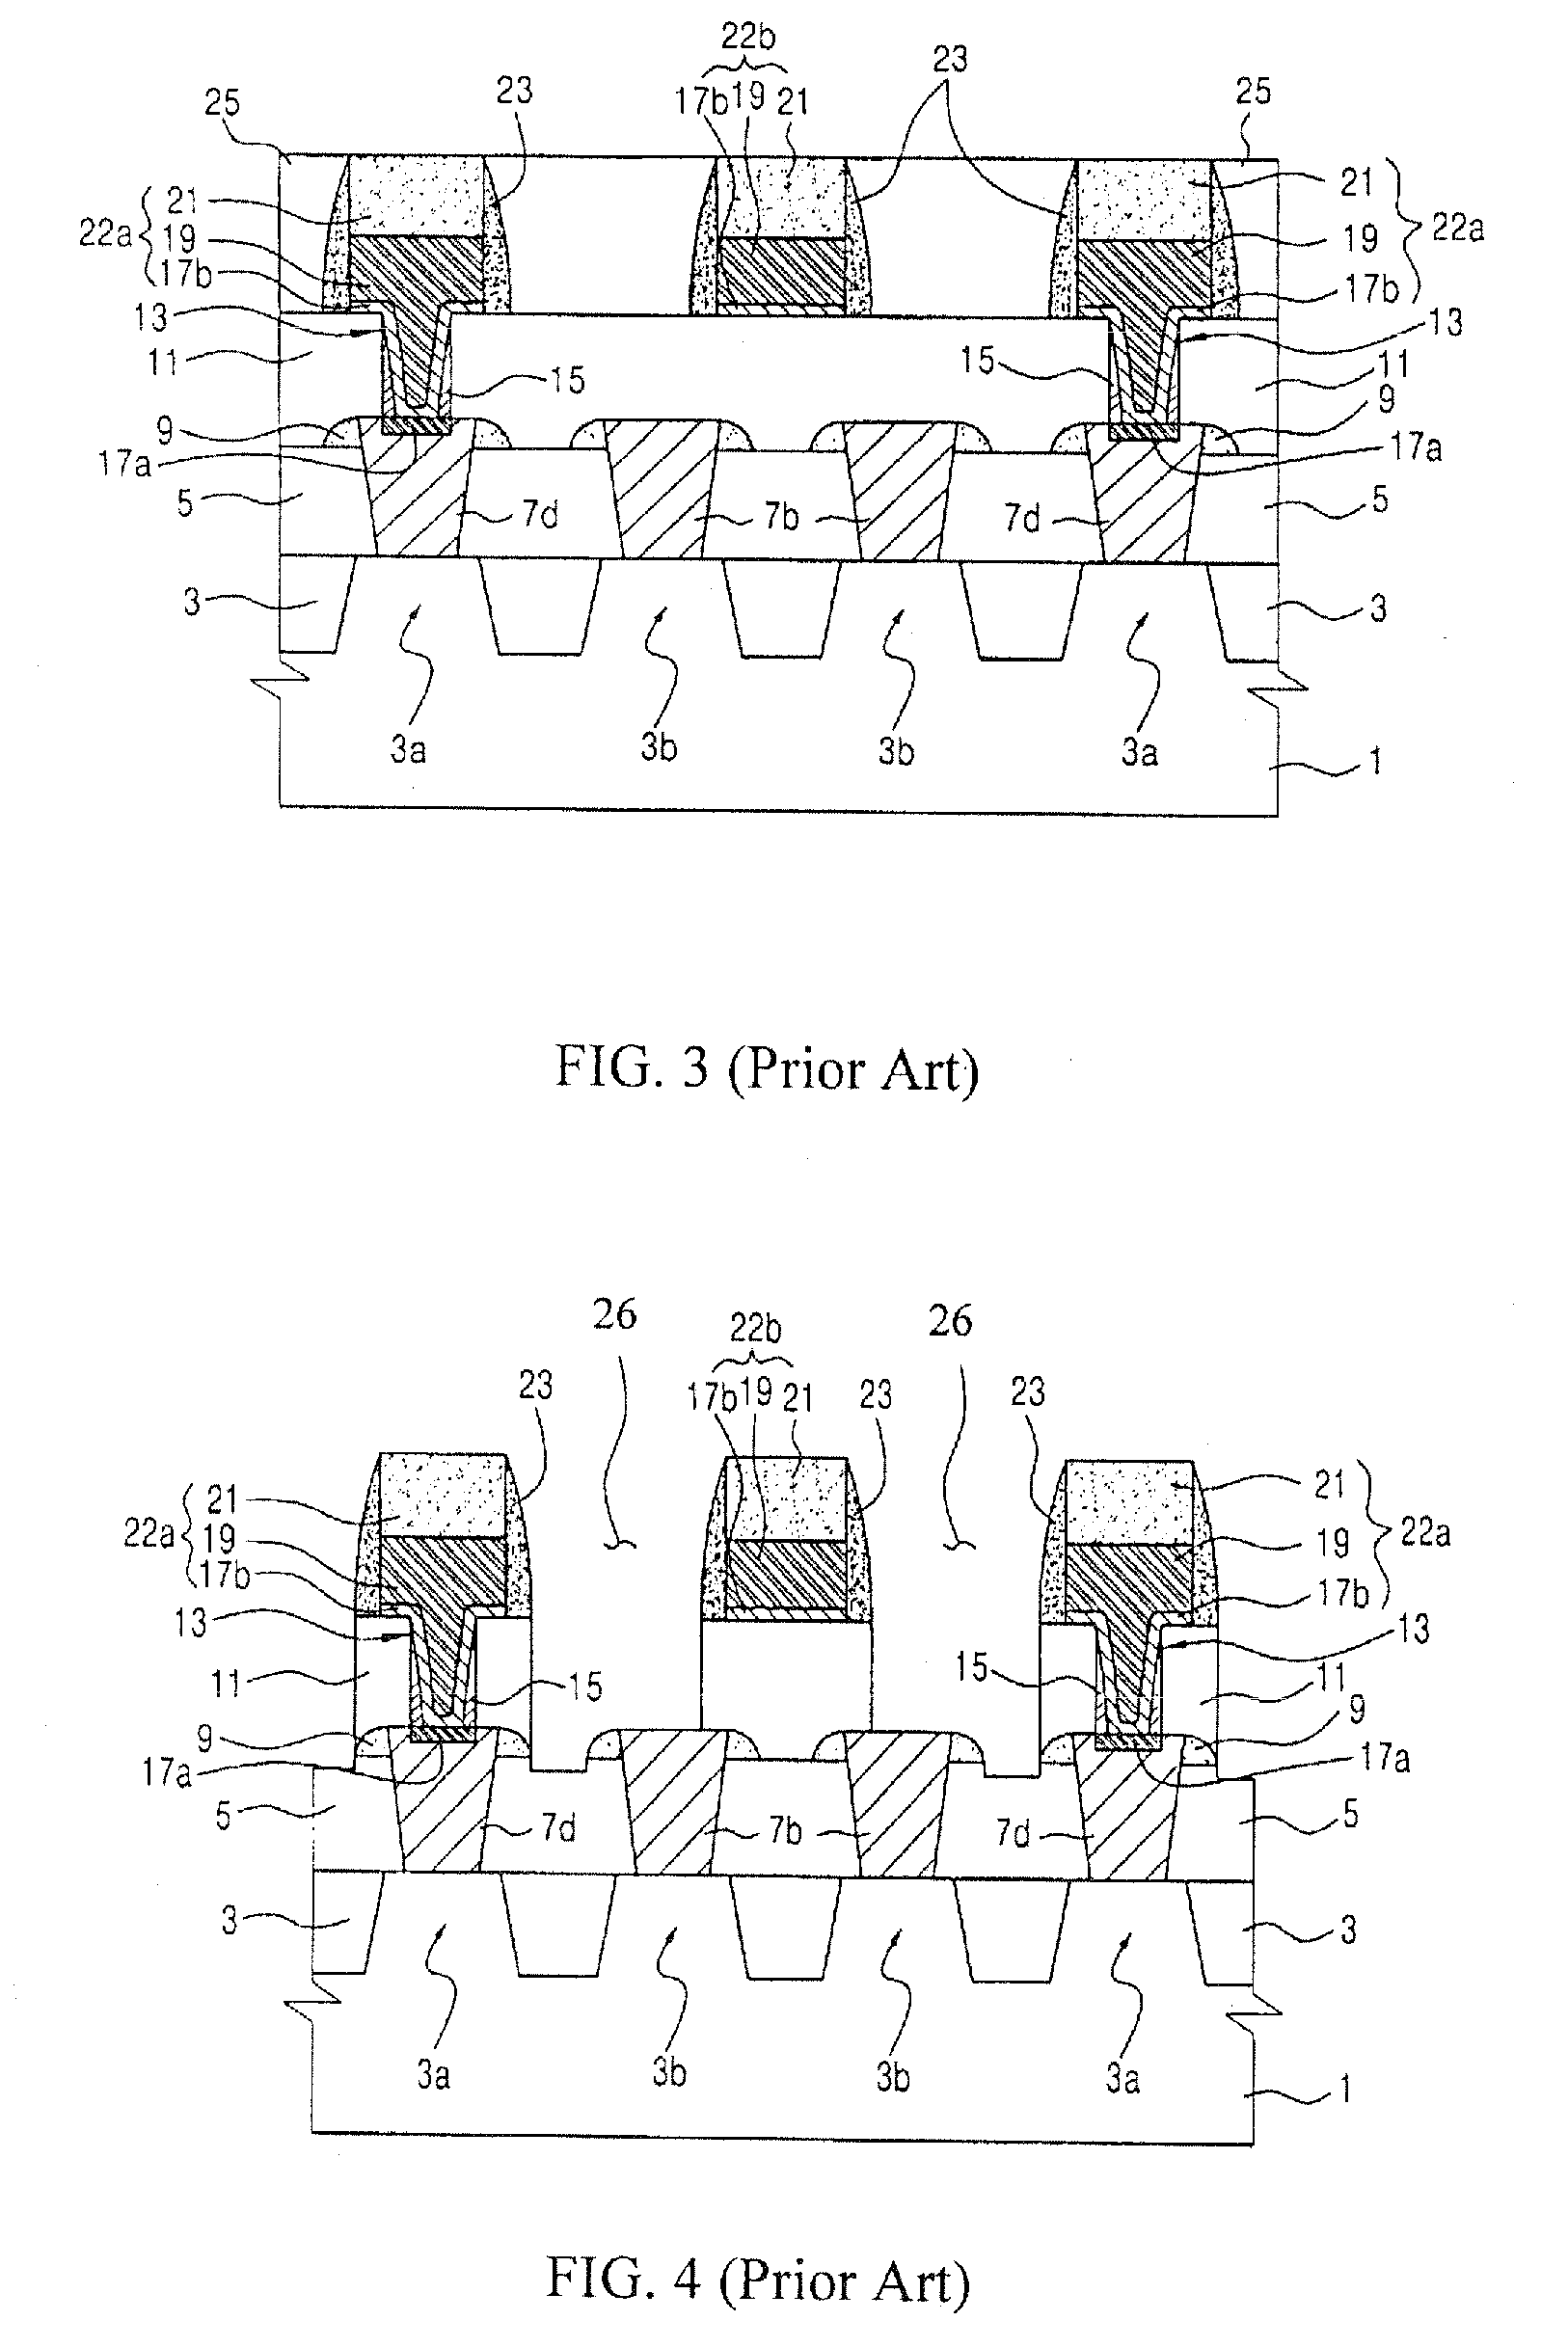 Semiconductor device having a contact structure with a contact spacer and method of fabricating the same